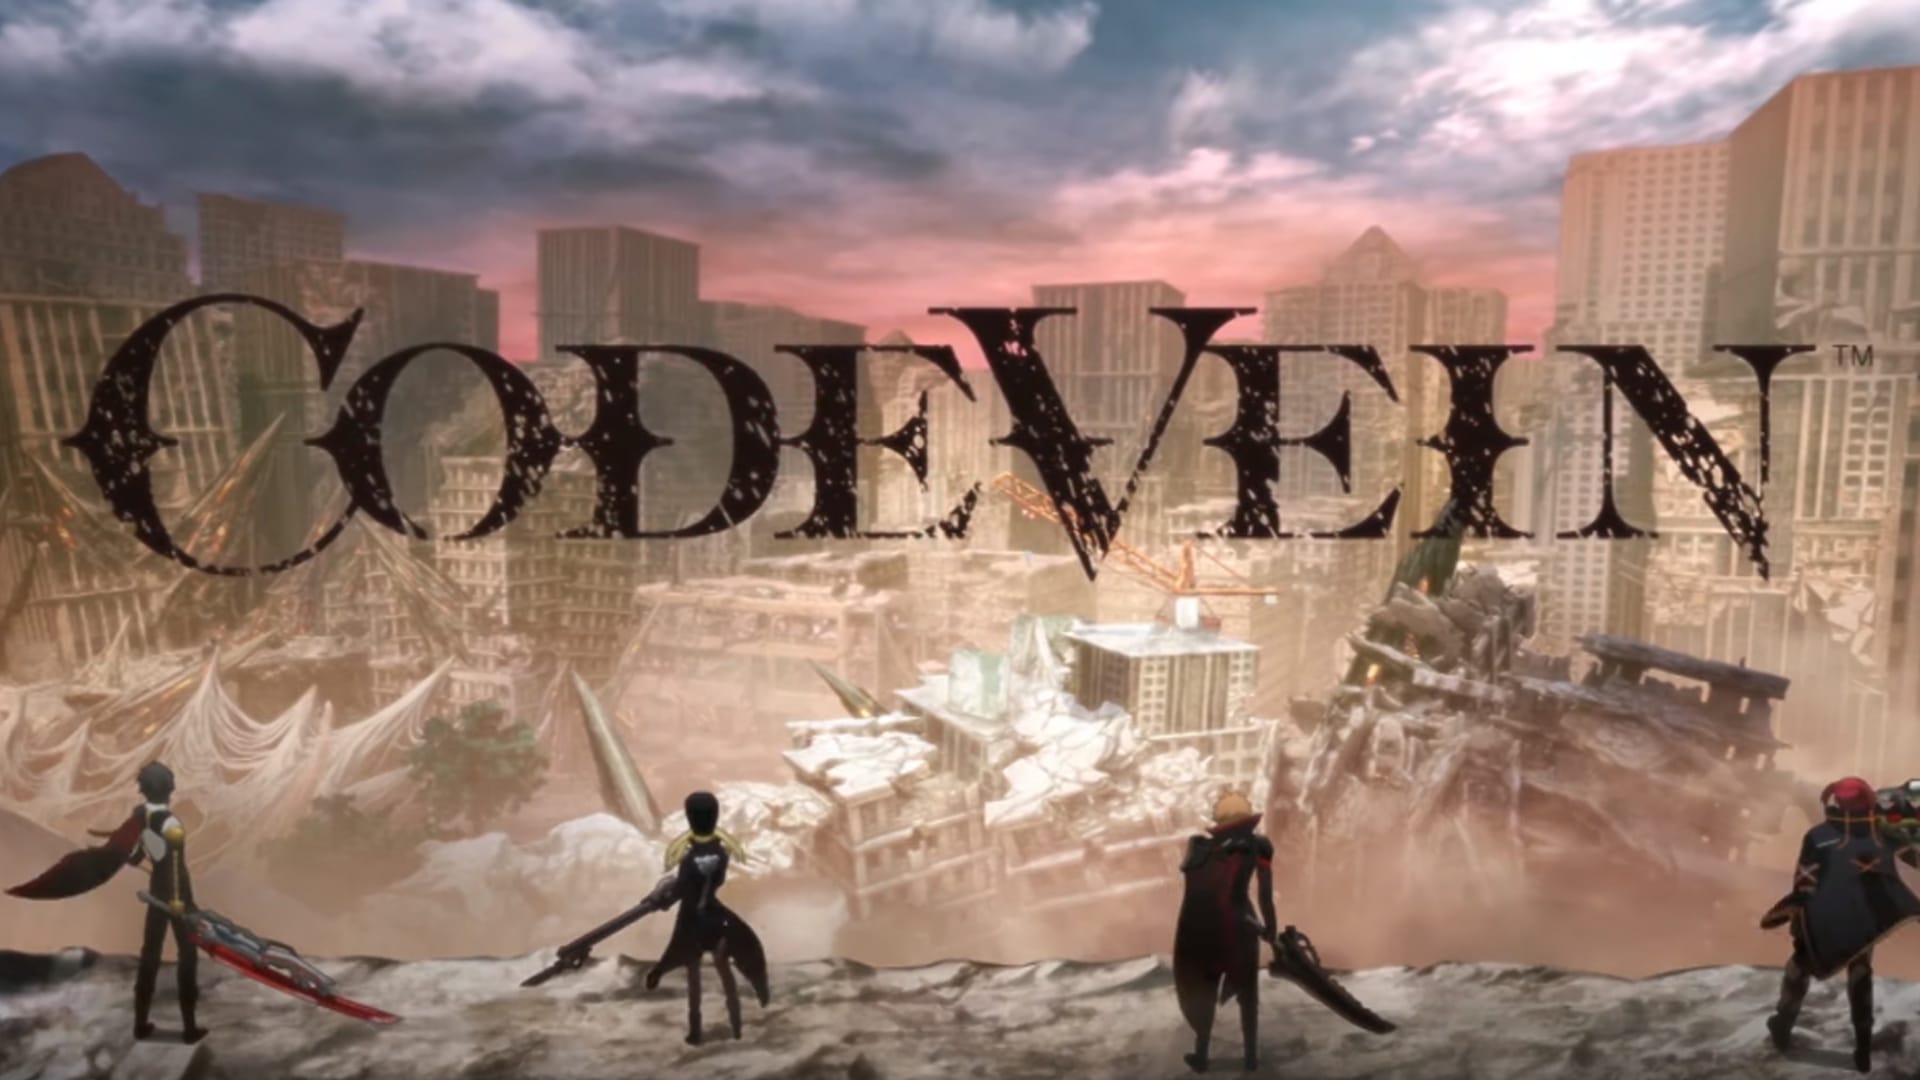 CODE VEIN's Season Pass outlined with Digital Deluxe Edition pre-orders